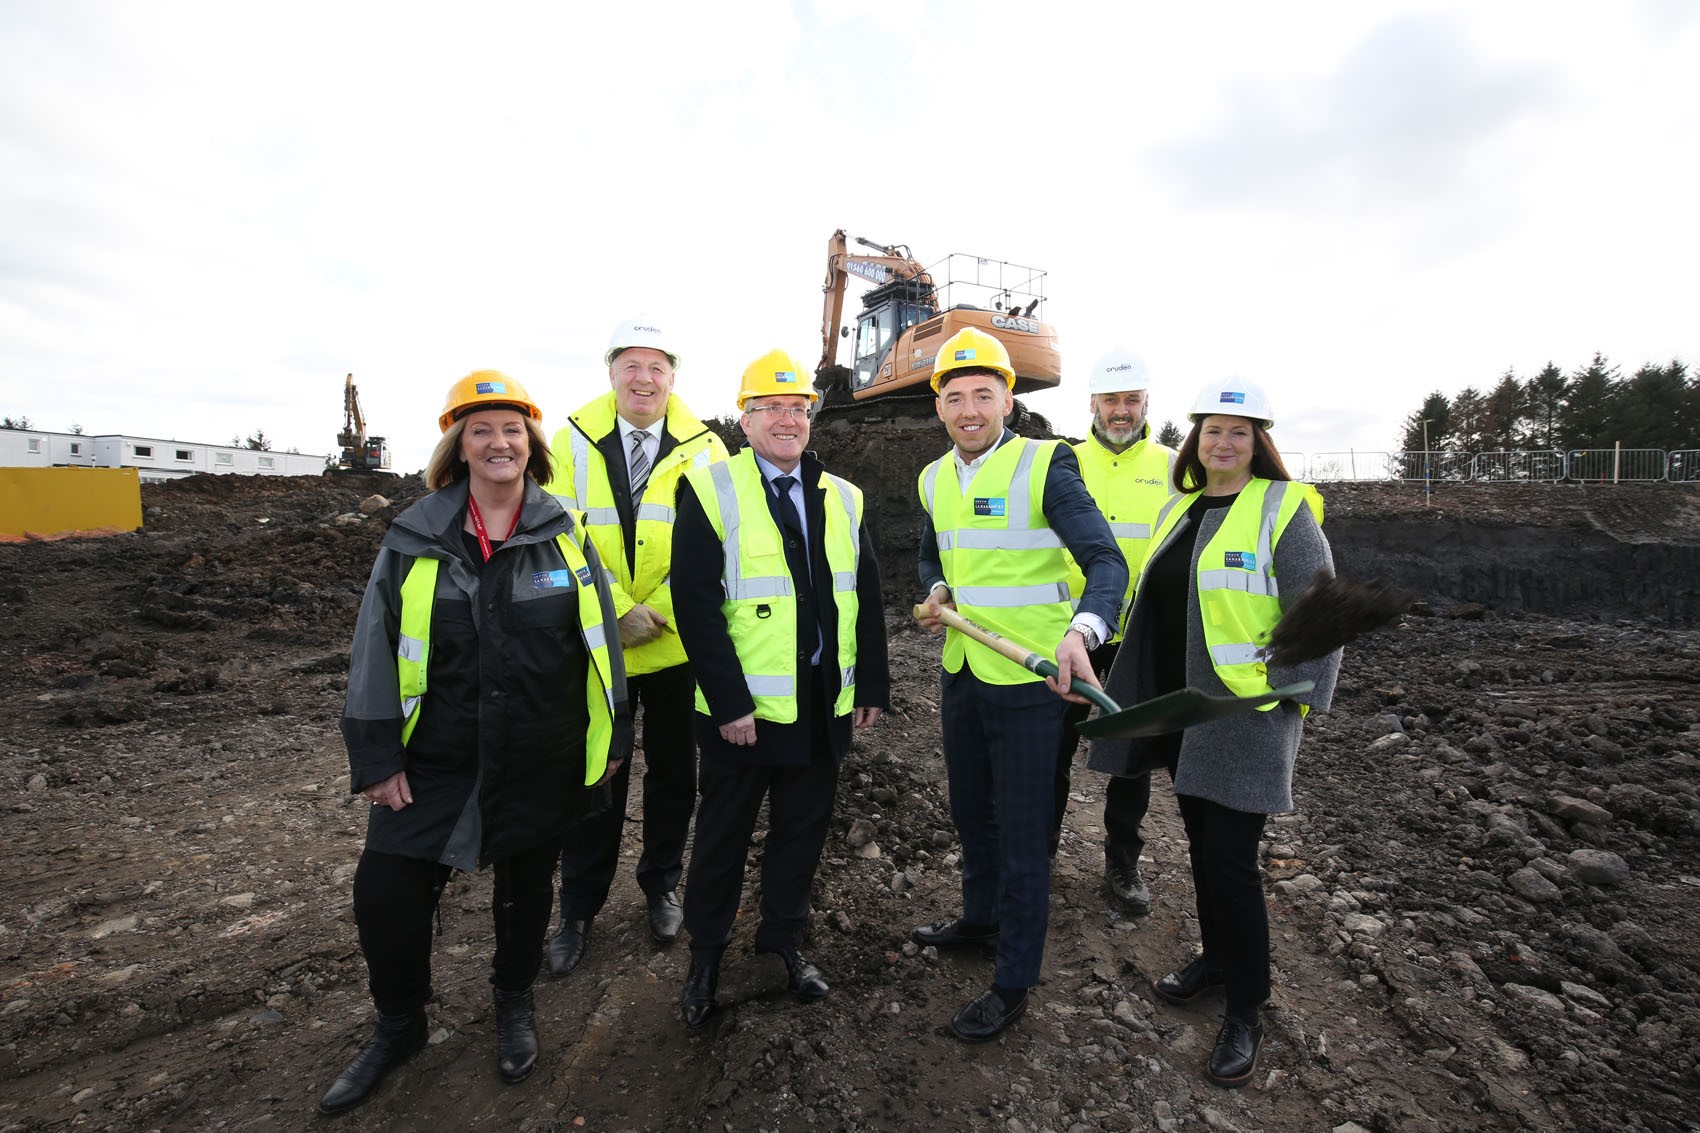 Cruden begins work on new council homes in East Kilbride